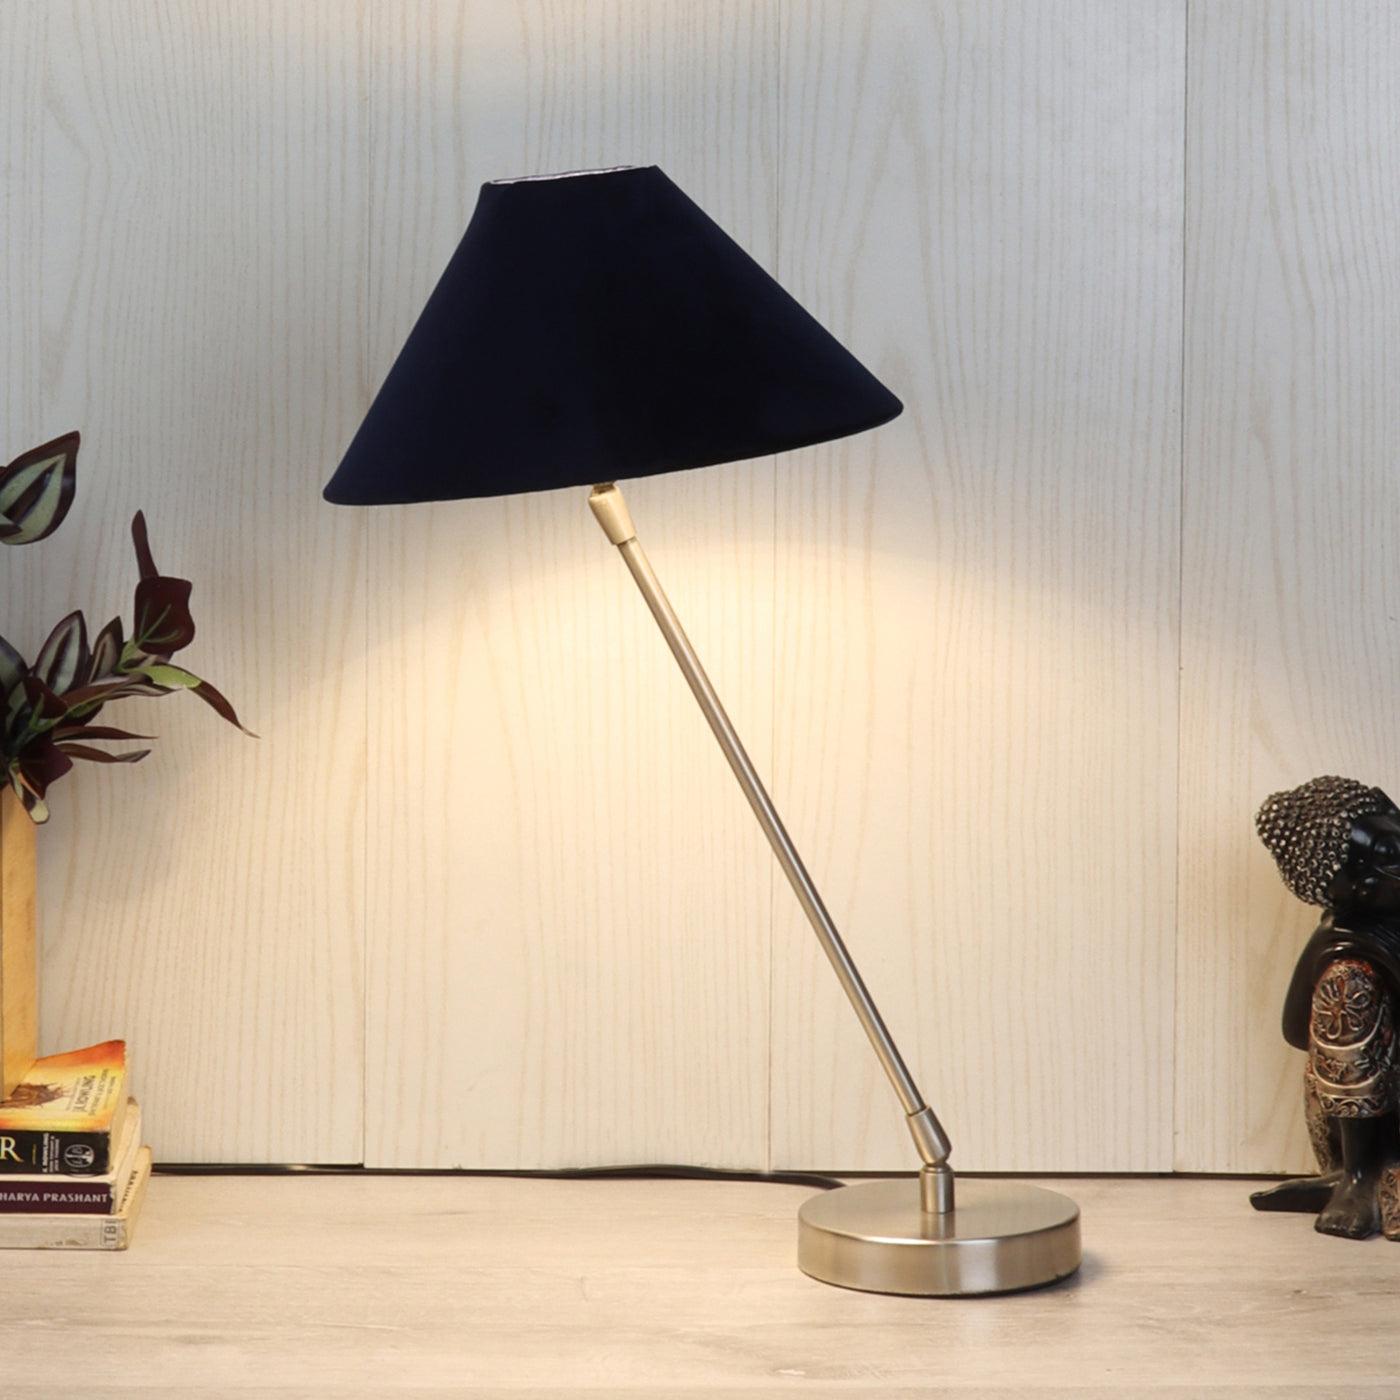 The "Small Silver MJ  Lamp" with Blue velvet shade